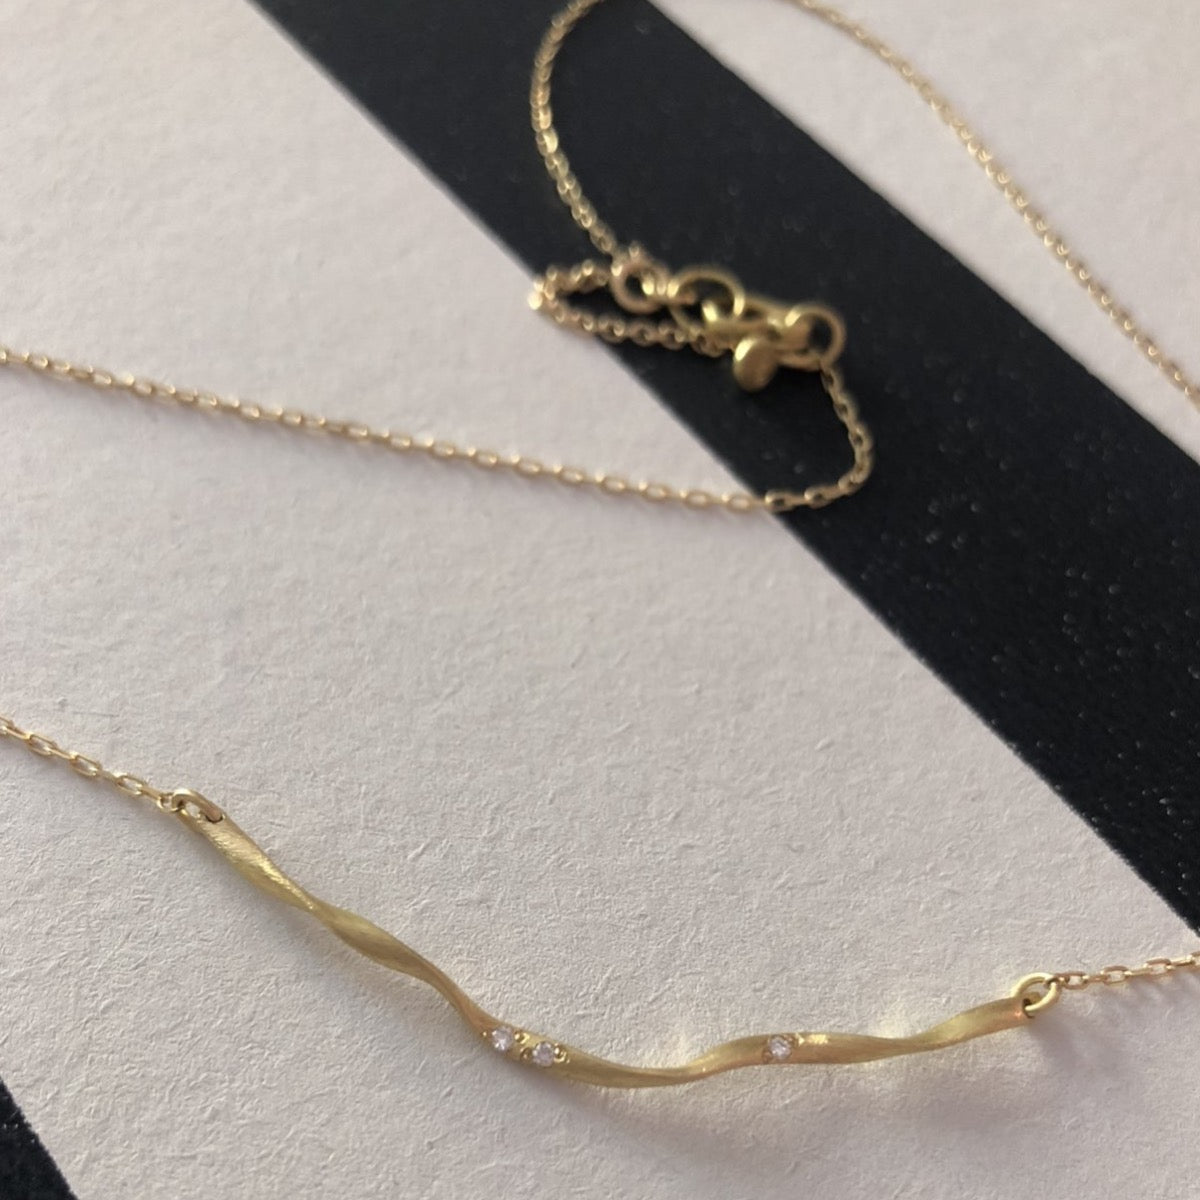 Flair necklace no.1 in 18 kt. recycled gold & 3 diamonds